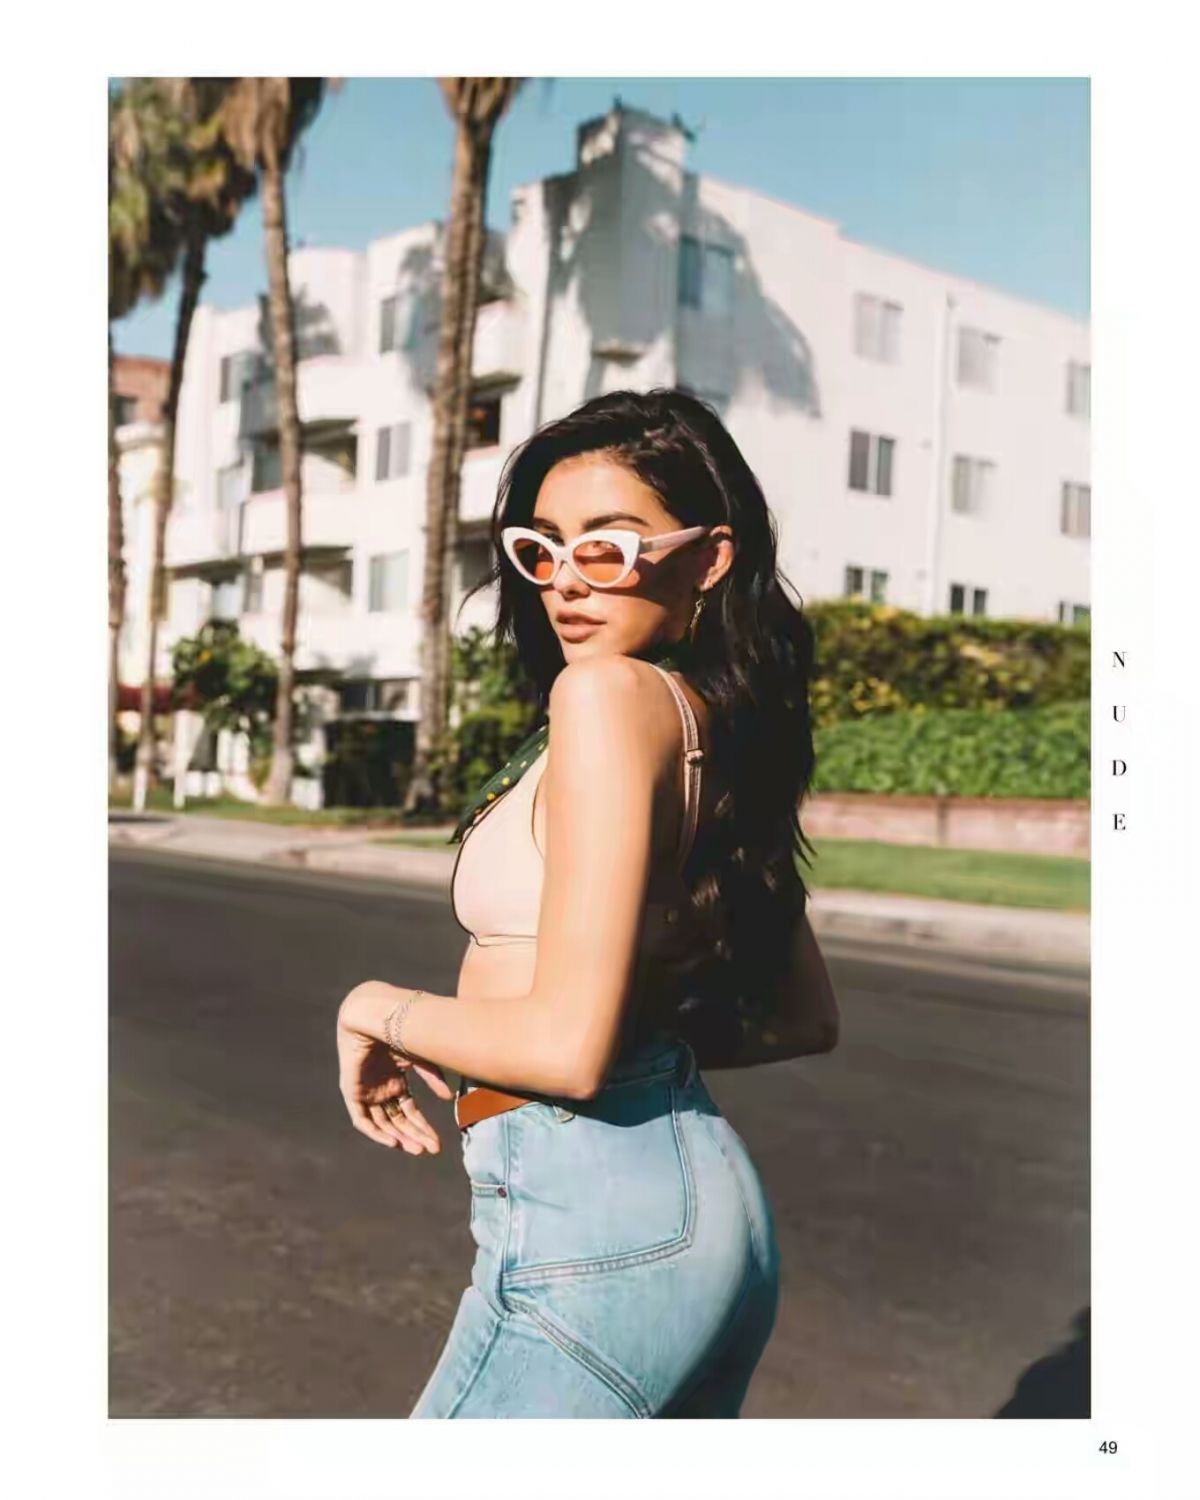 Barely-Legal Bombshell Madison Beer At Her Best #79628144